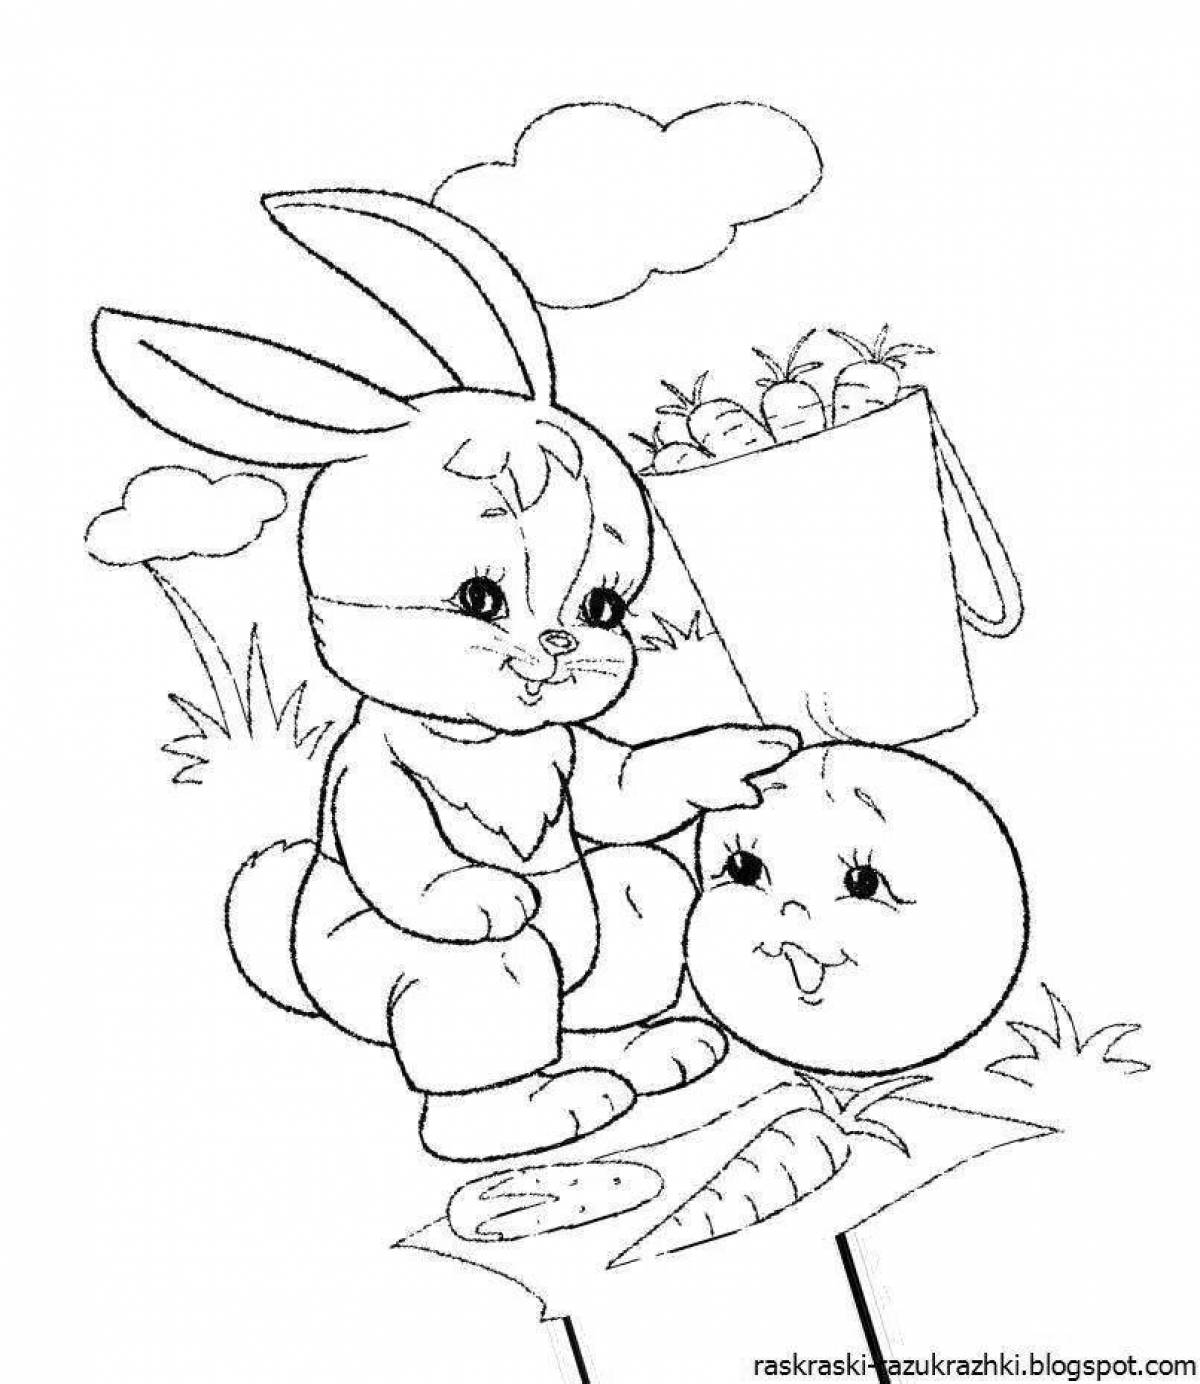 Amazing Bun Heroes Coloring Pages